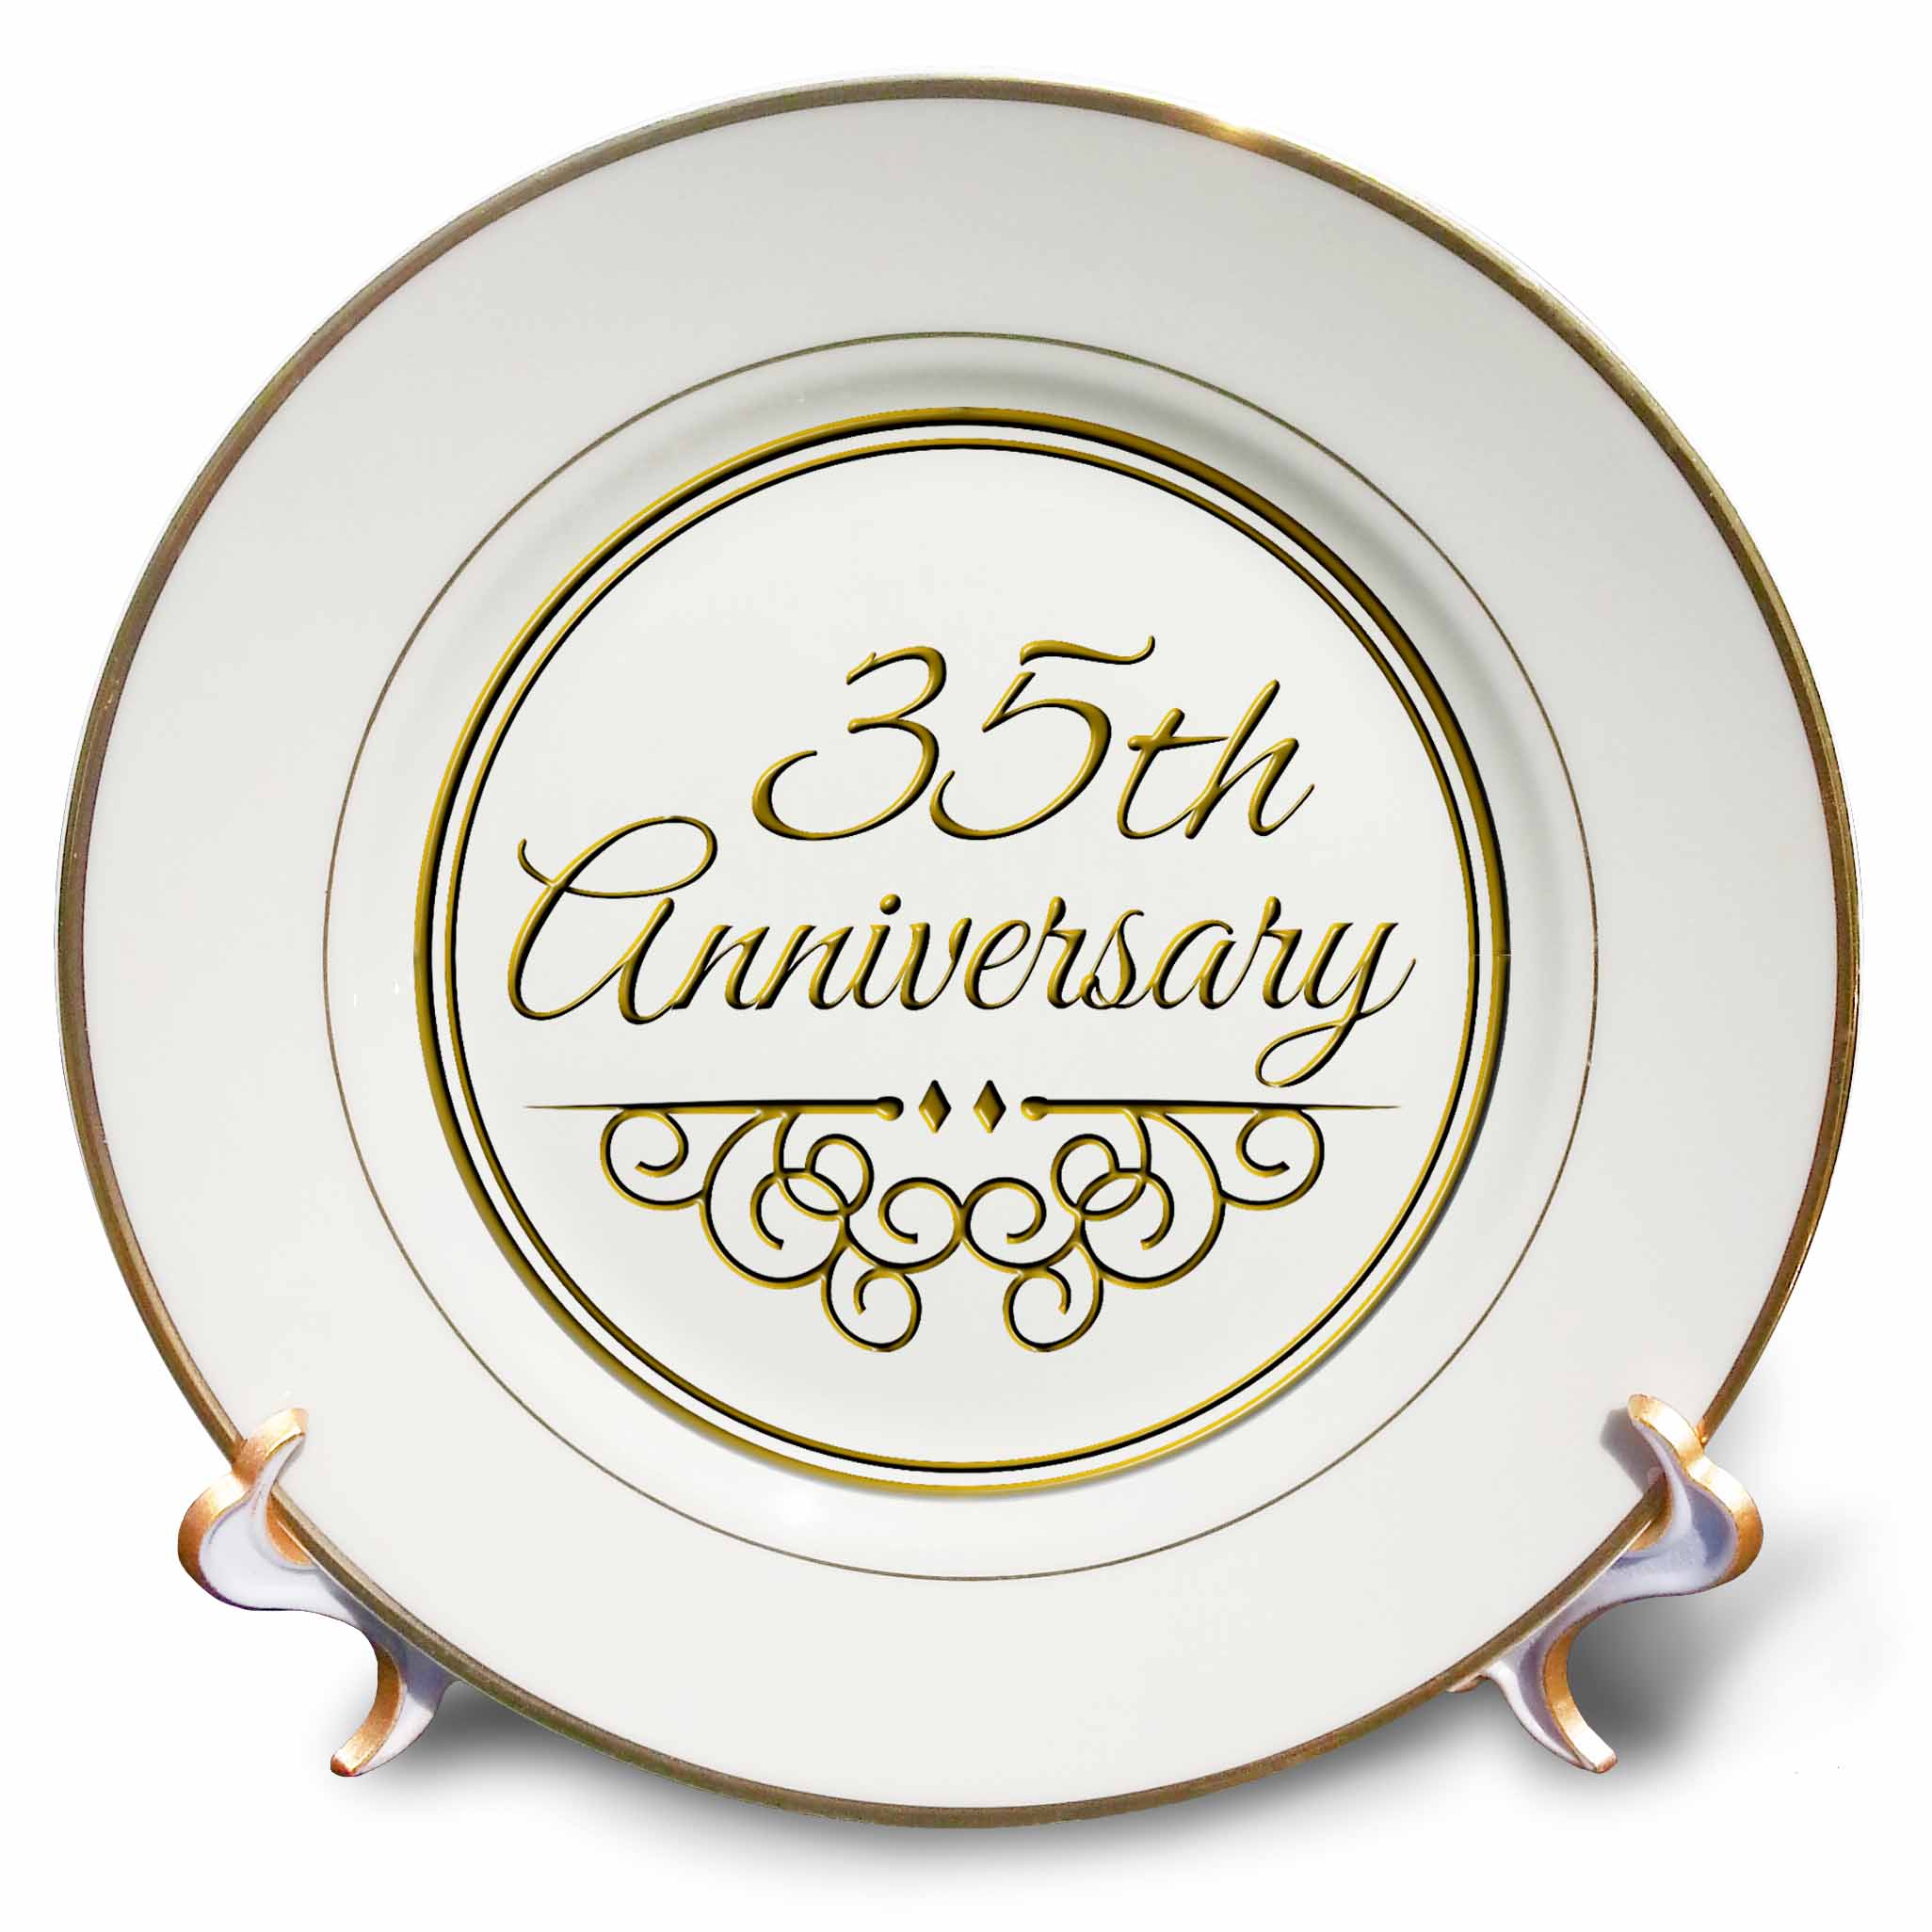 3dRose 35th Anniversary gift - gold text for celebrating wedding anniversaries - 35 years married together, Porcelain Plate, 8-inch - image 1 of 1